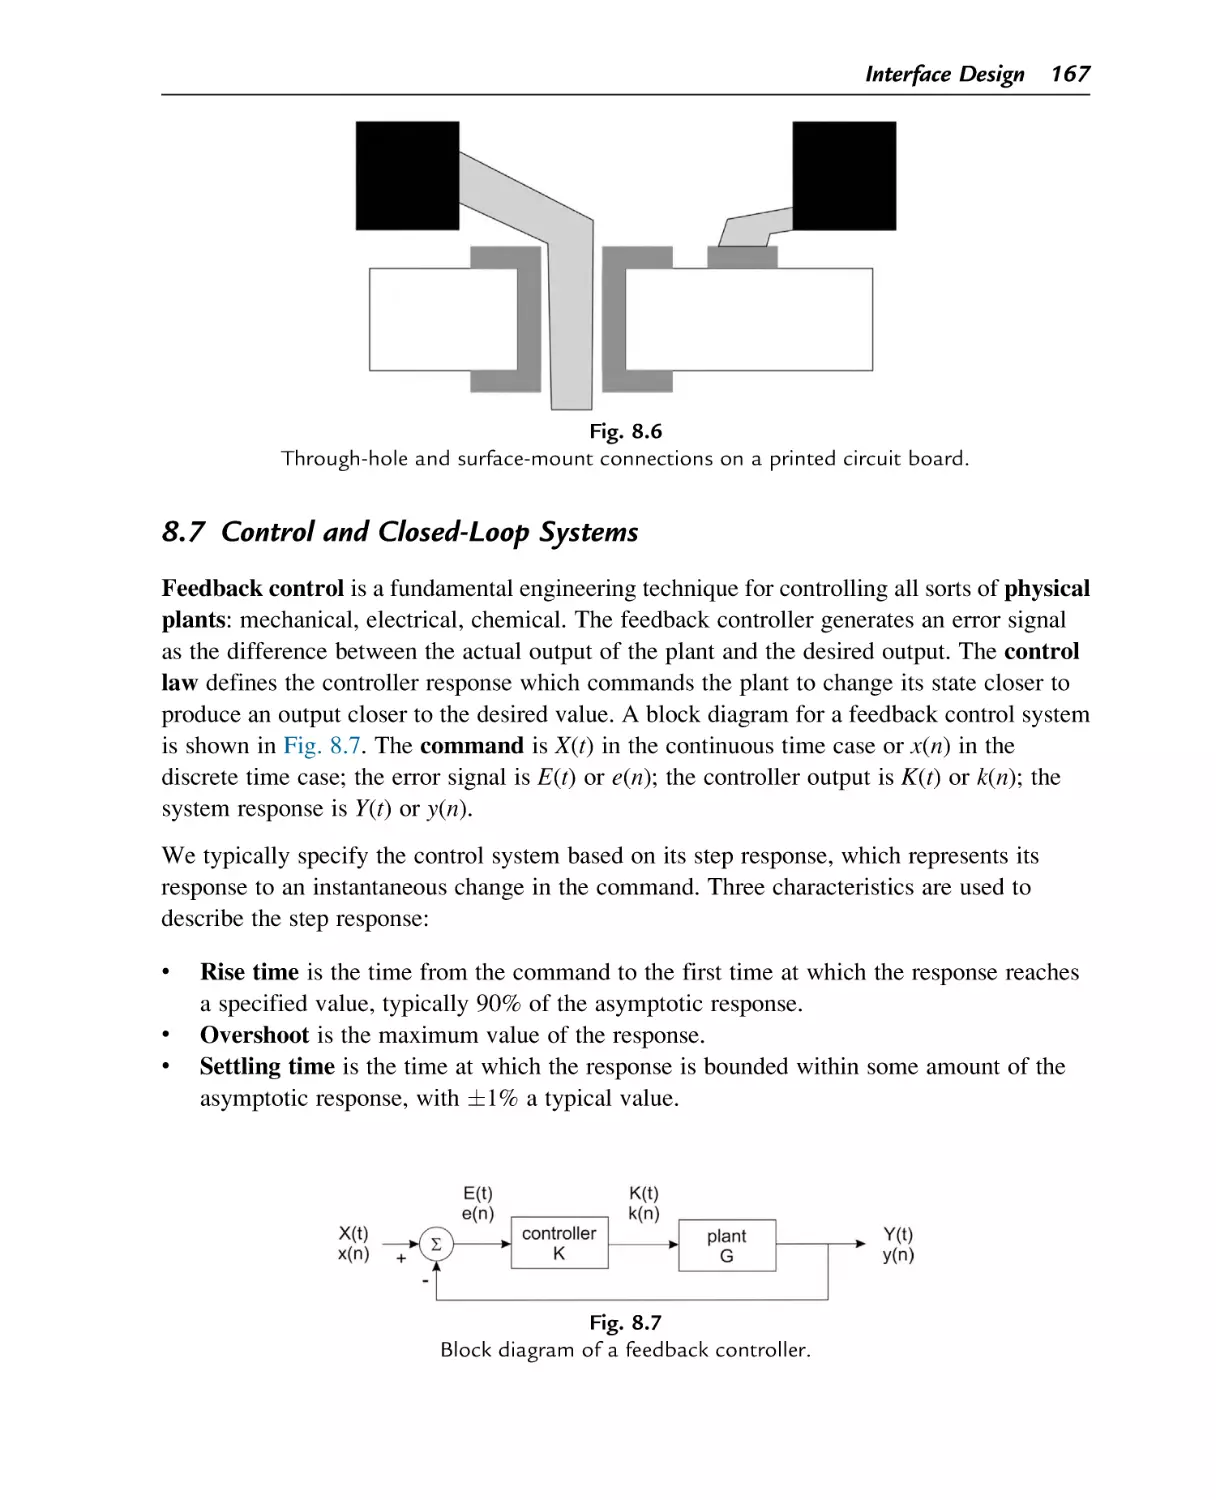 Control and Closed-Loop Systems